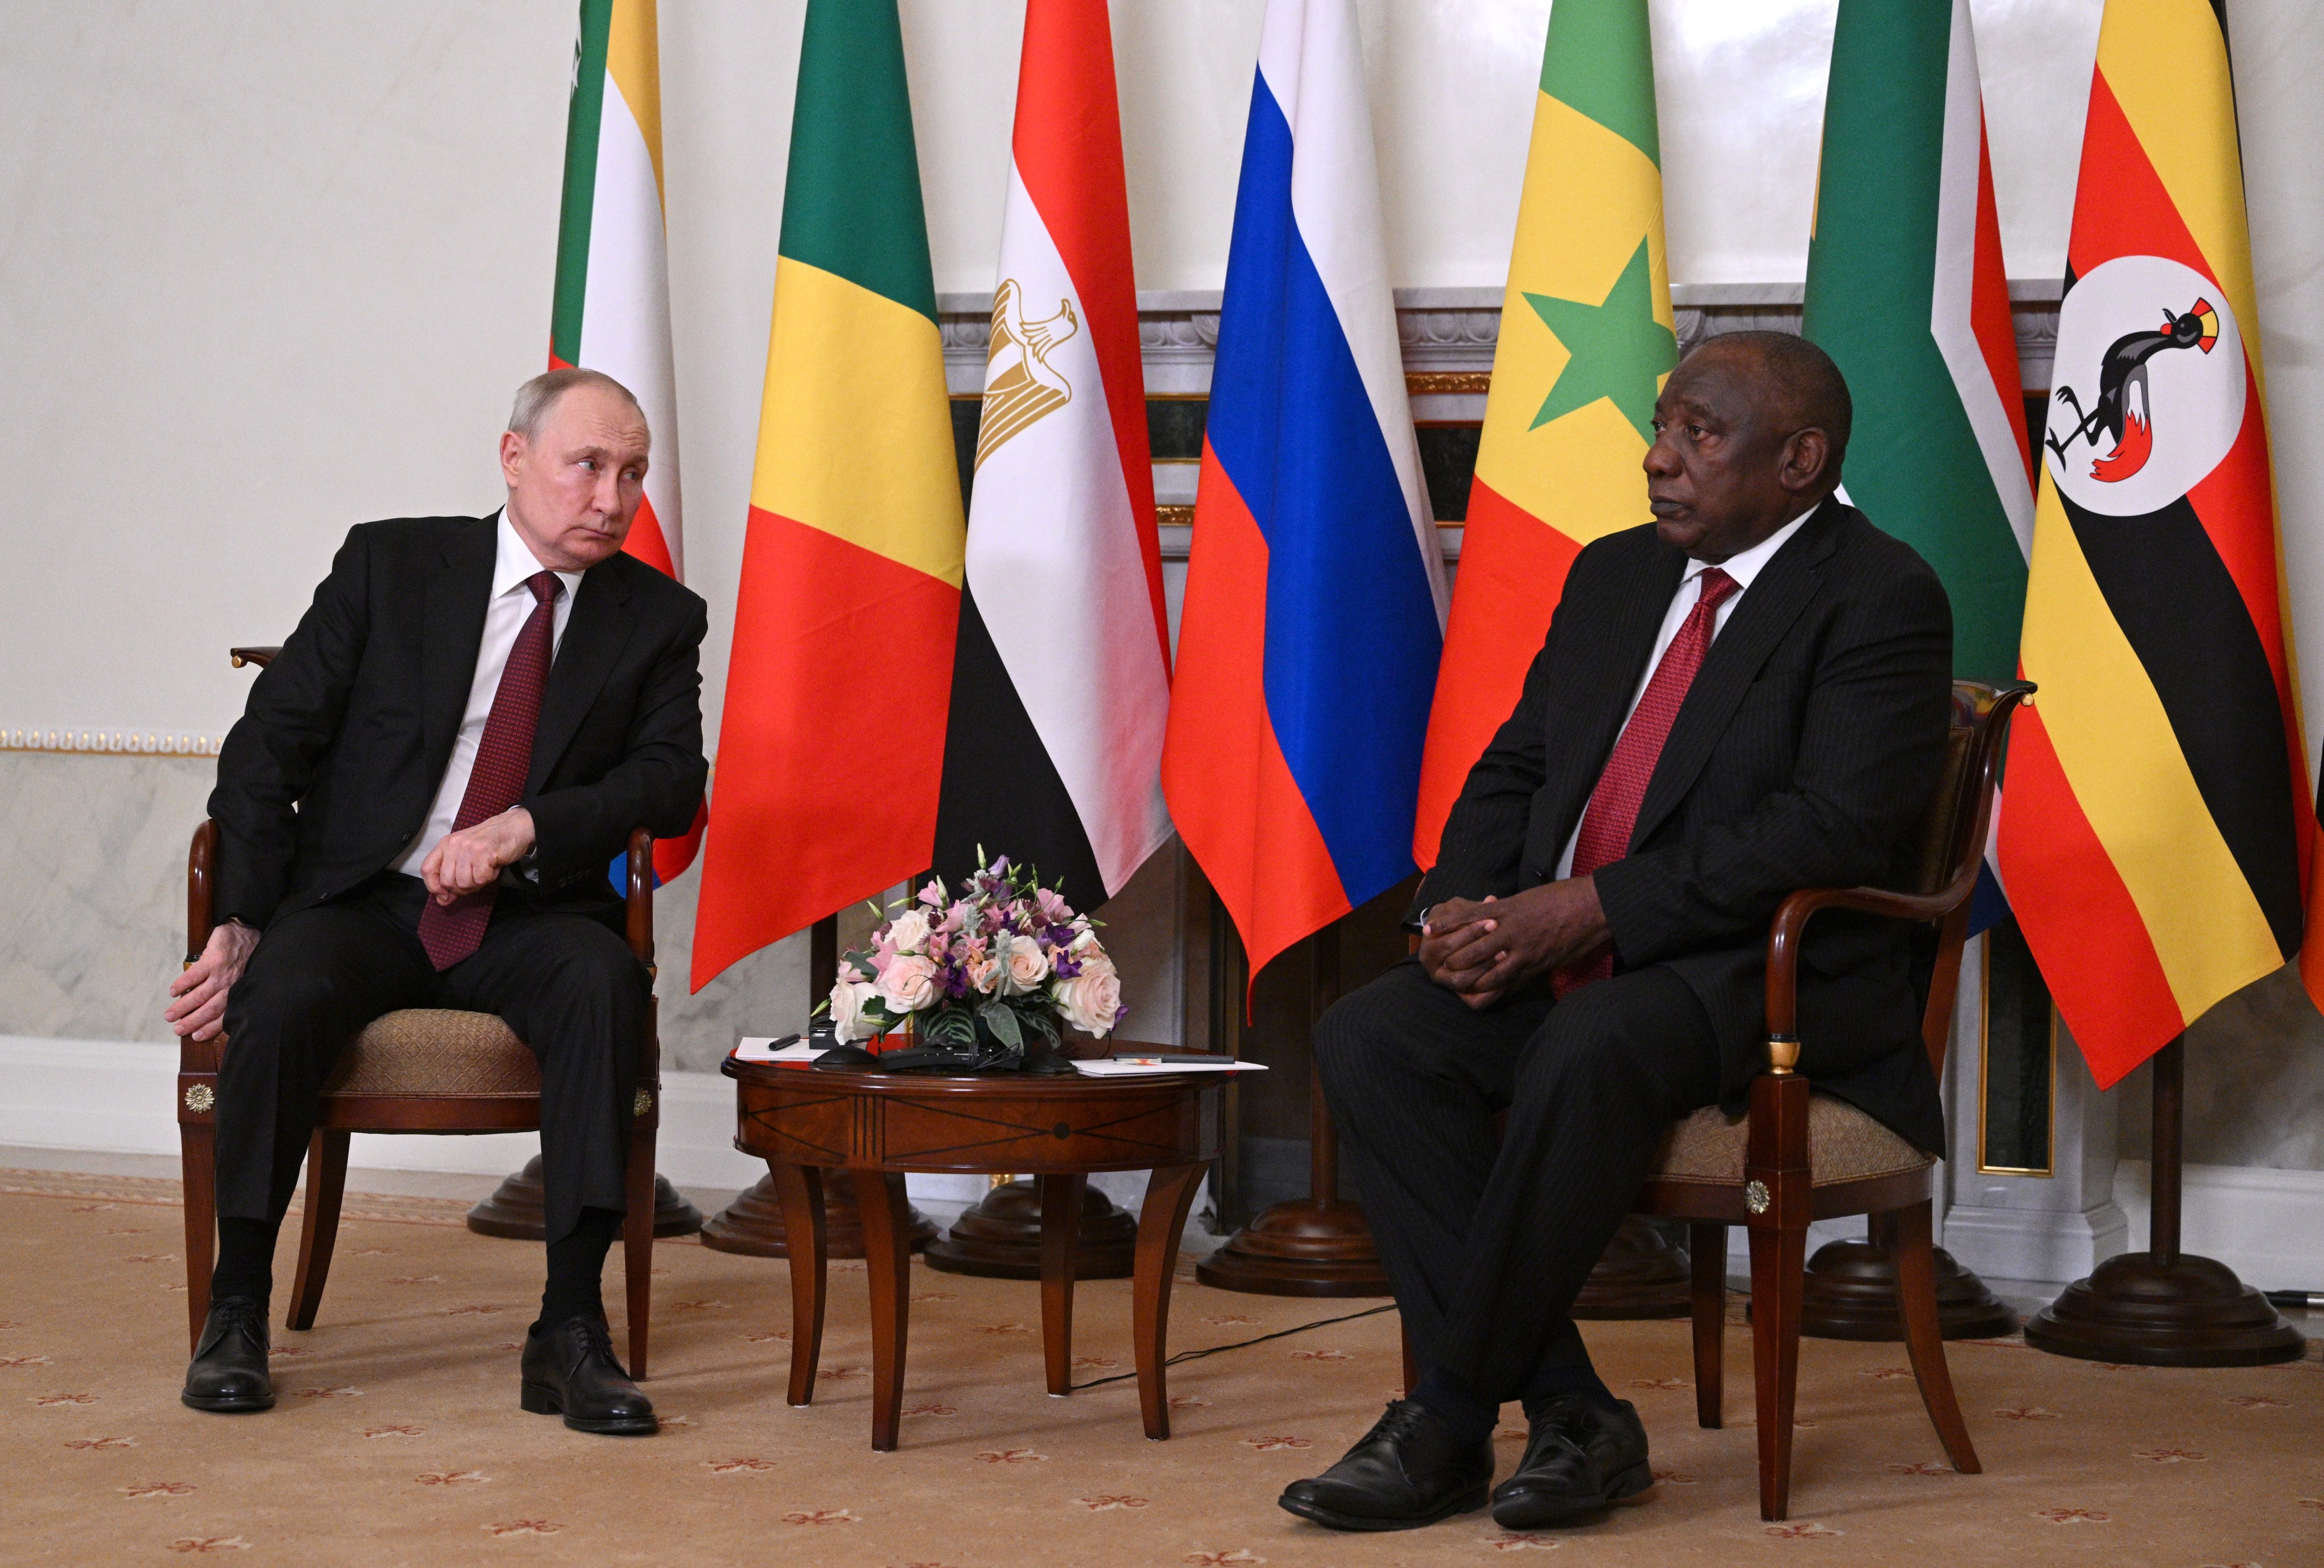 South African President Cyril Ramaphosa said that next month’s BRICS summit, which Vladimir Putin has been invited to, will be held in-person despite an arrest warrant on the Russian leader. Photo: EPA-EFE